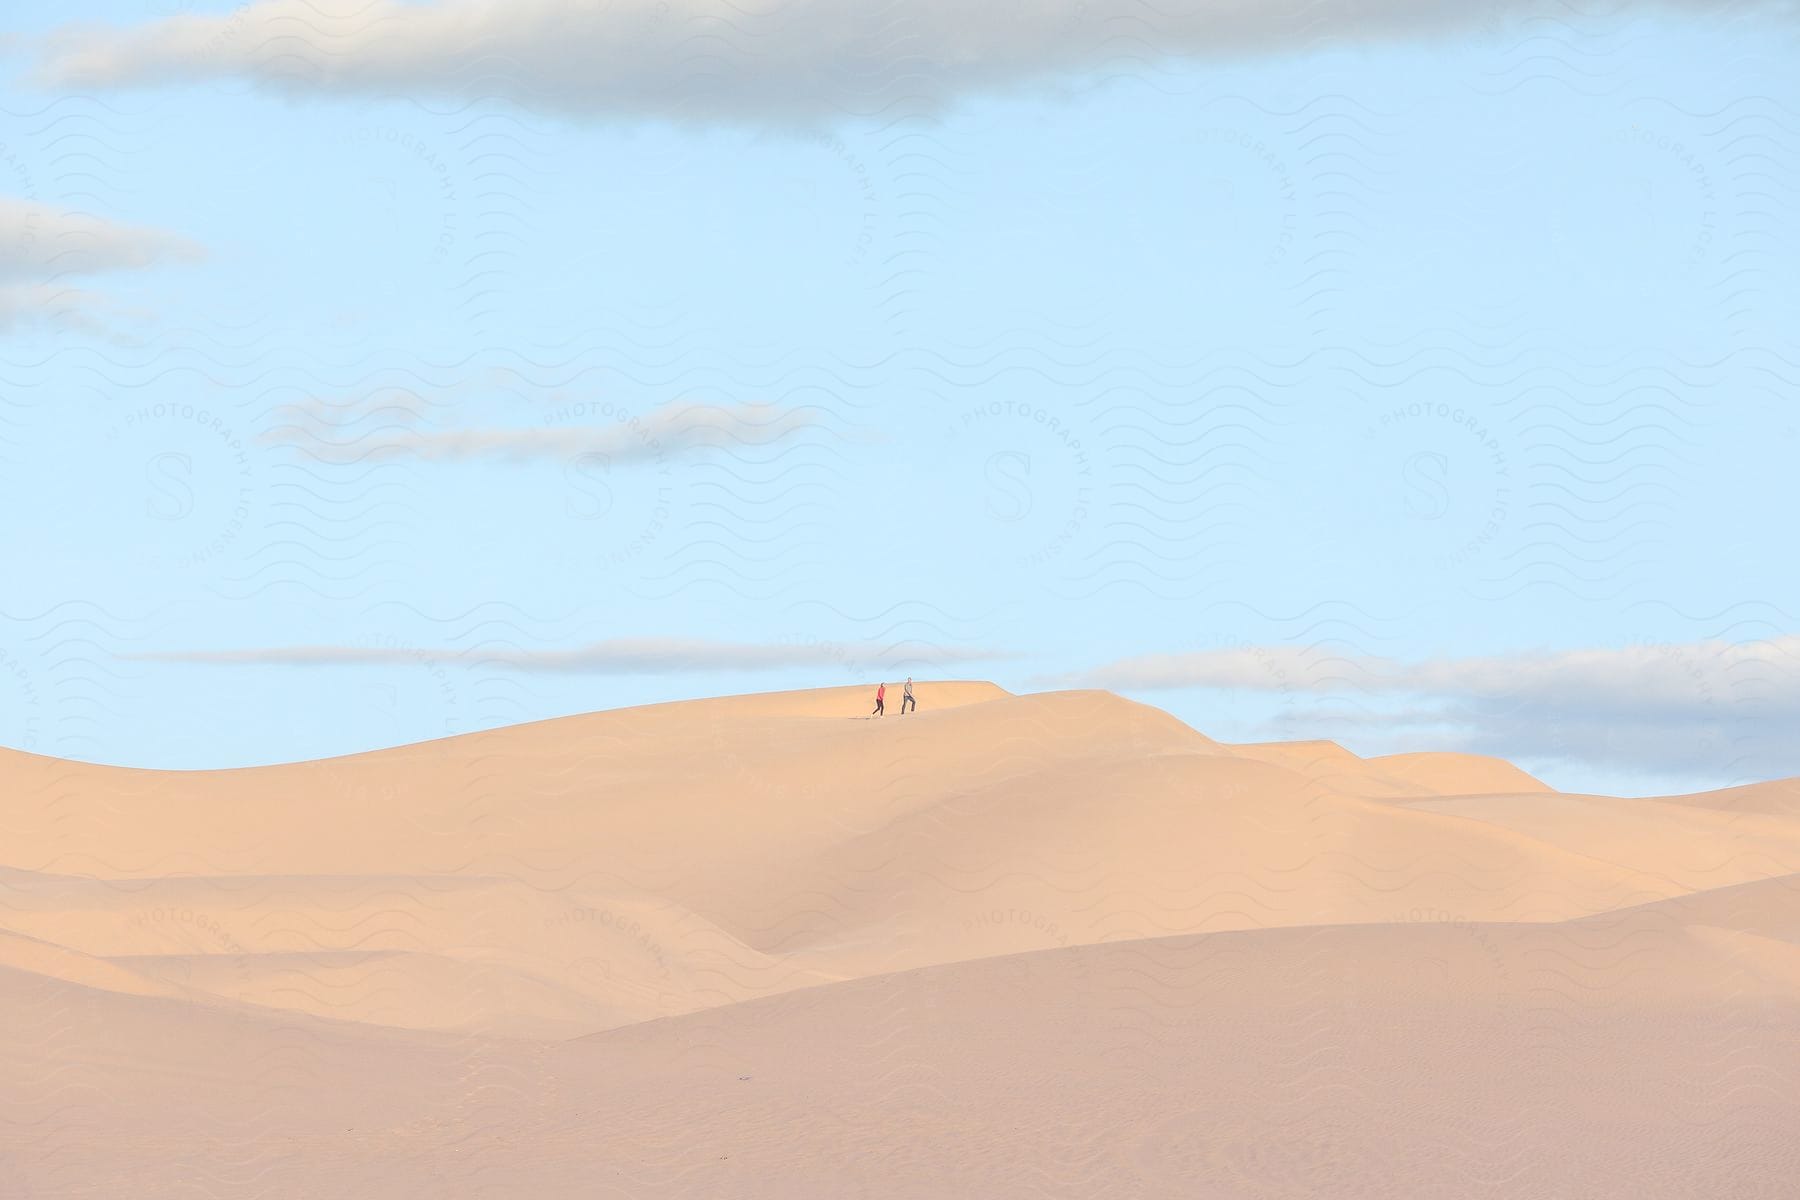 Two people walking on sand dunes in the desert during the day